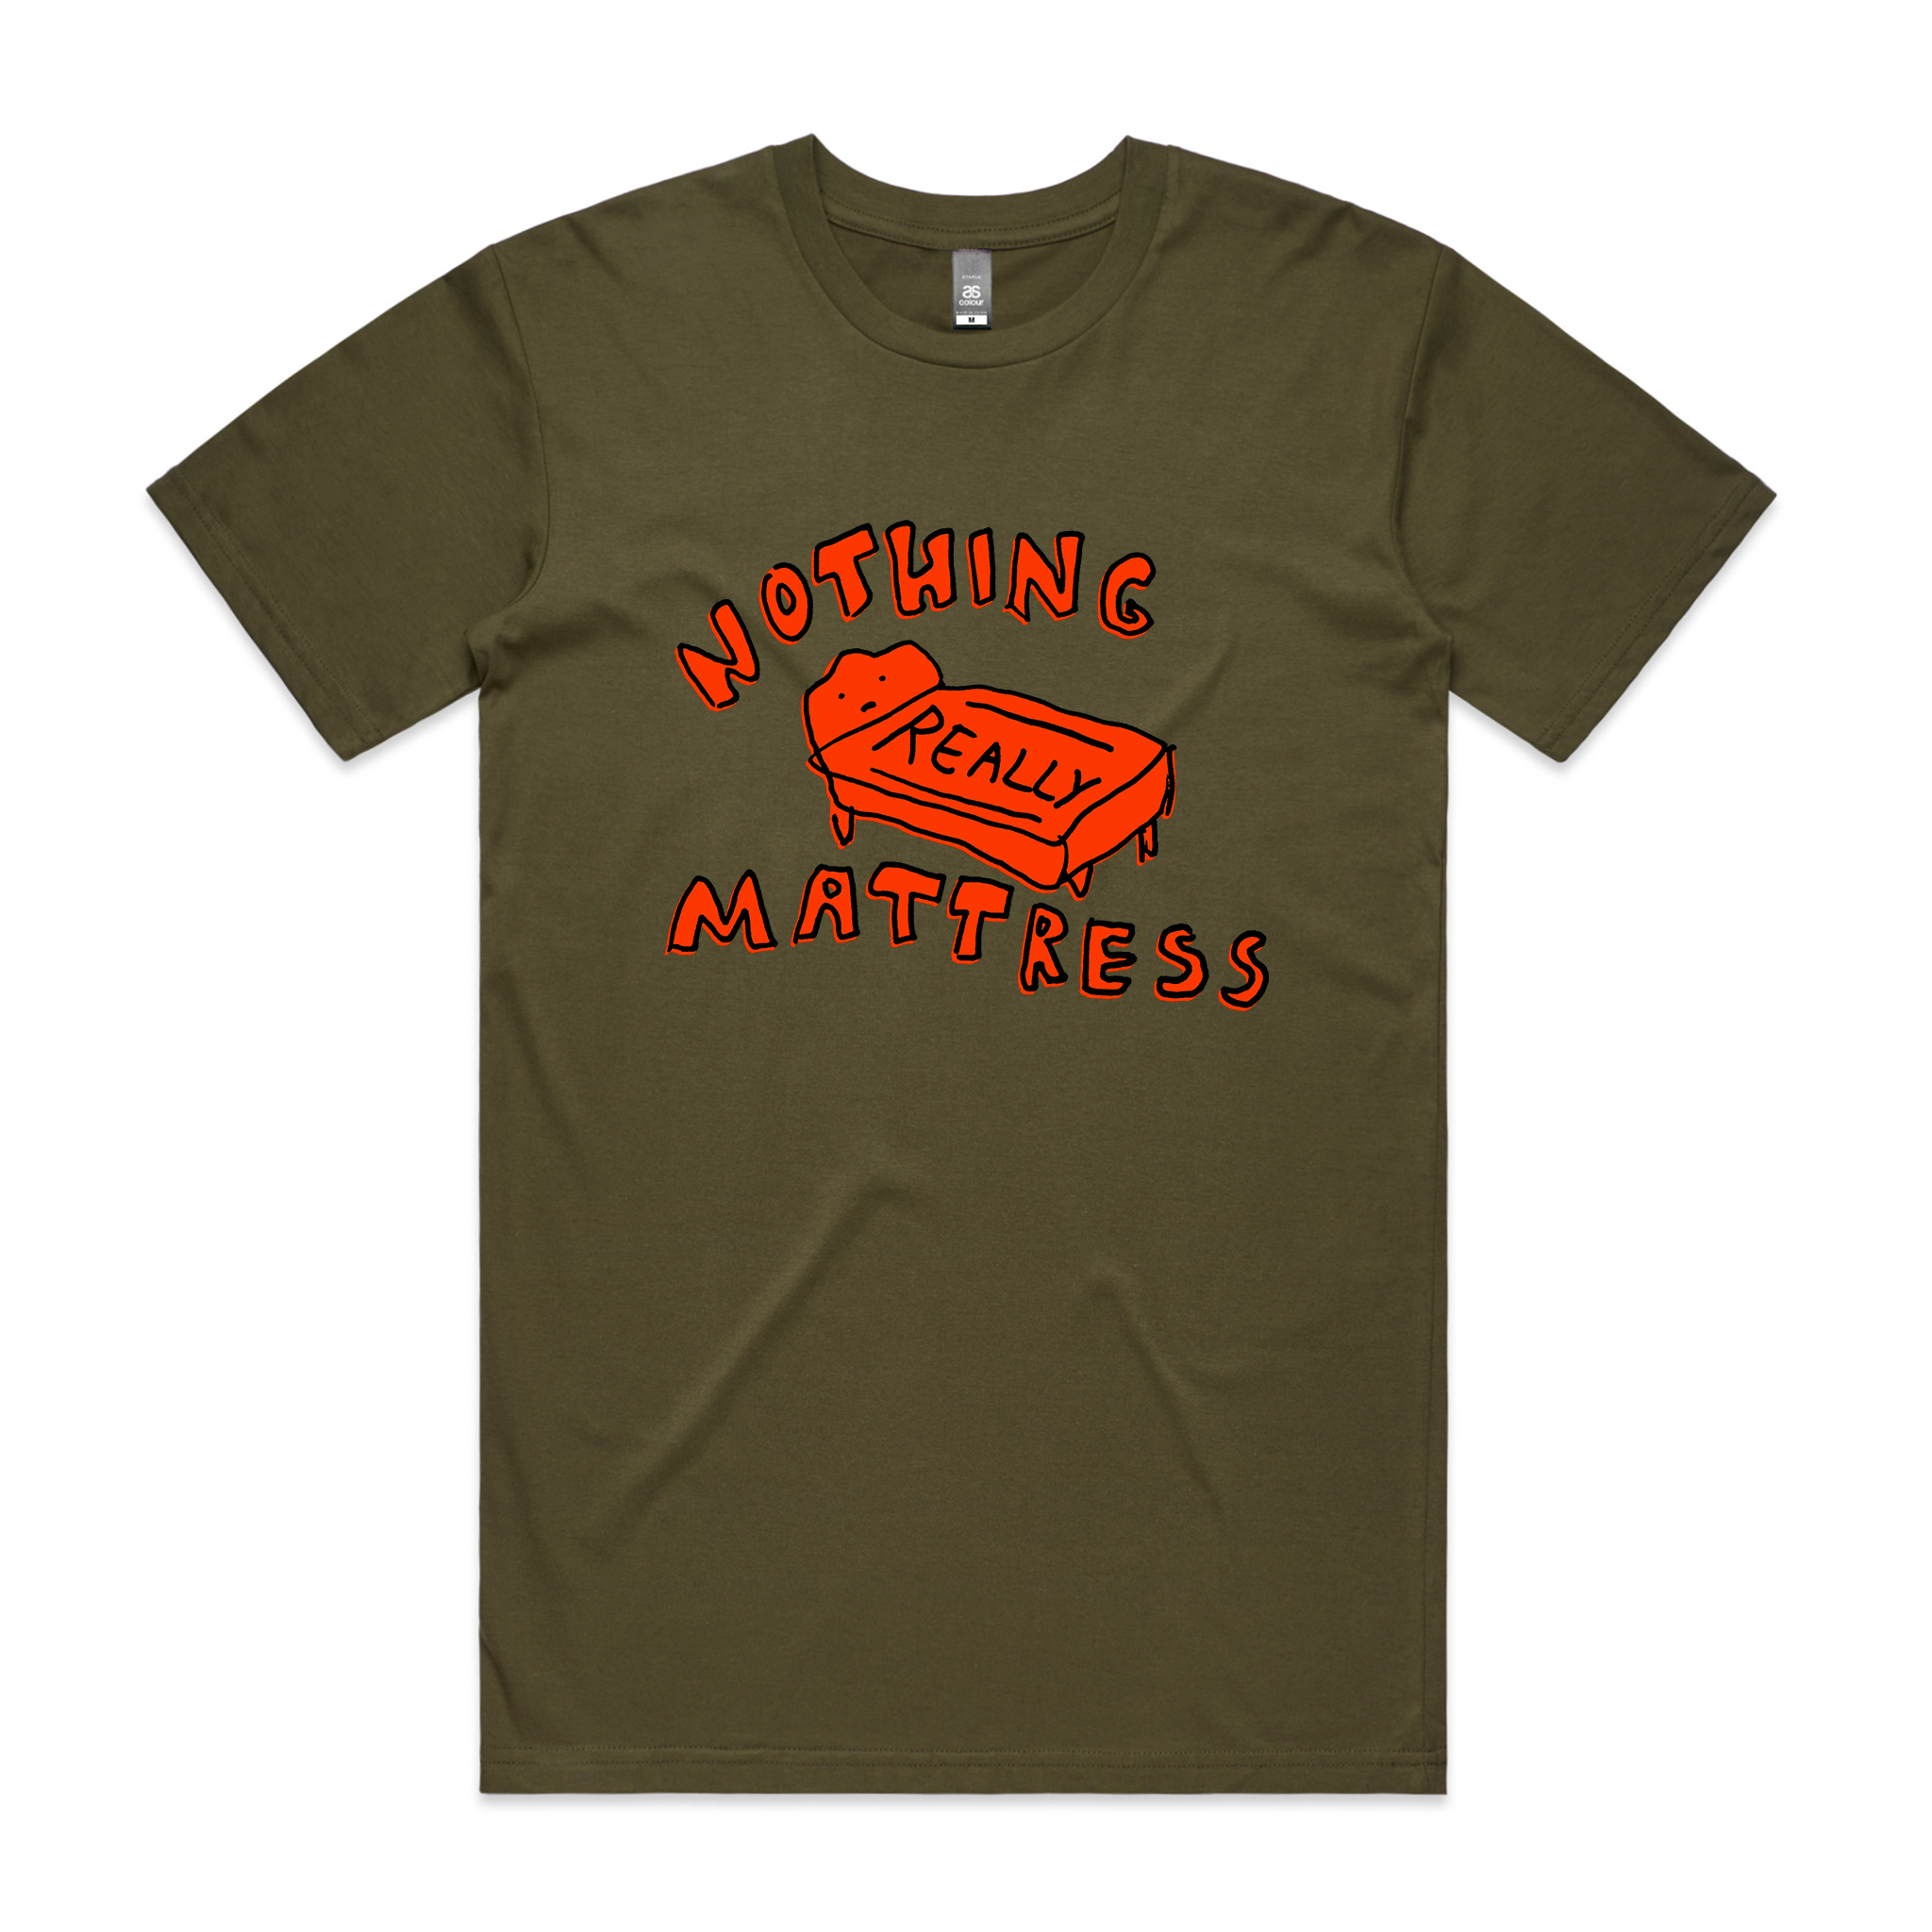 Nothing Really Mattress Tee